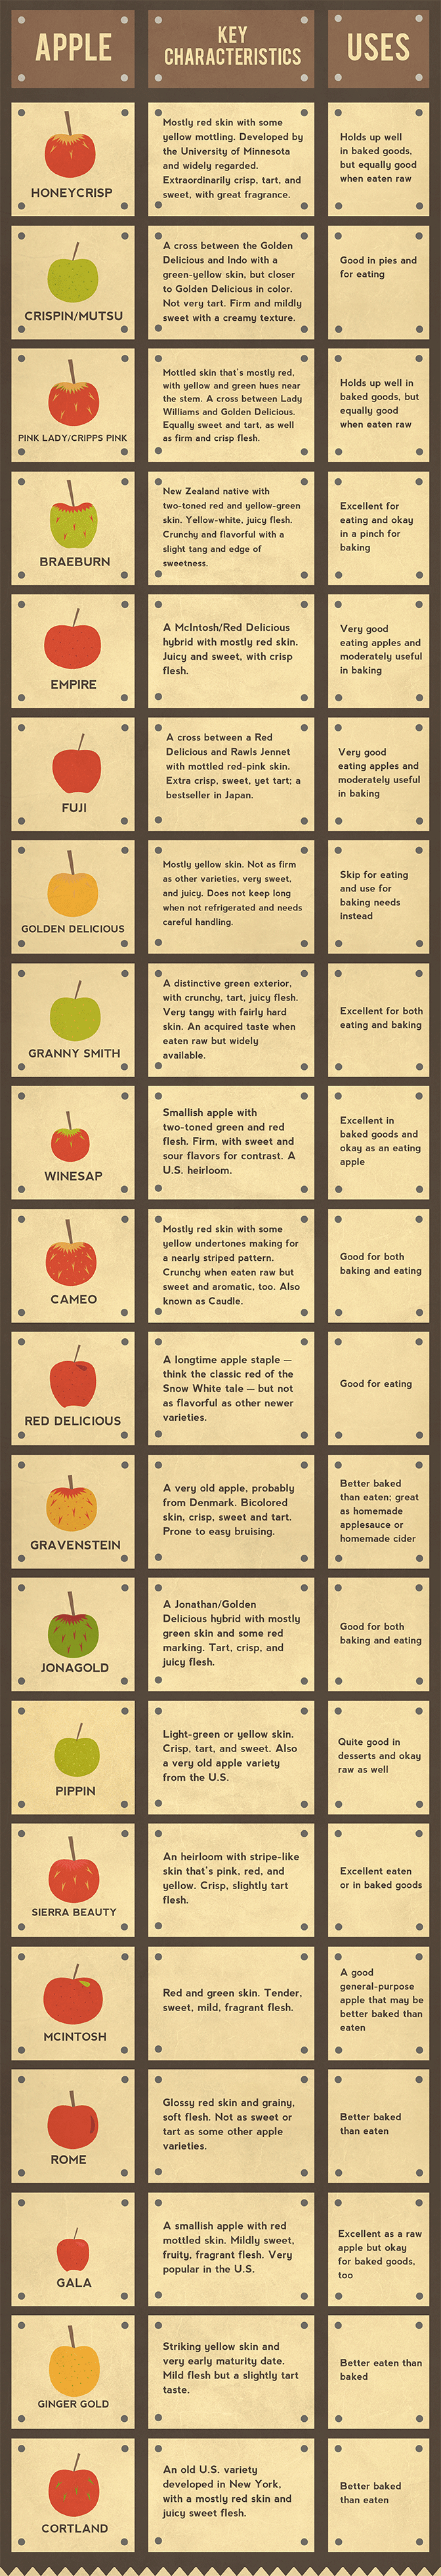 Guide to Picking Apples - Some Popular Apples and Their Origins and Qualities